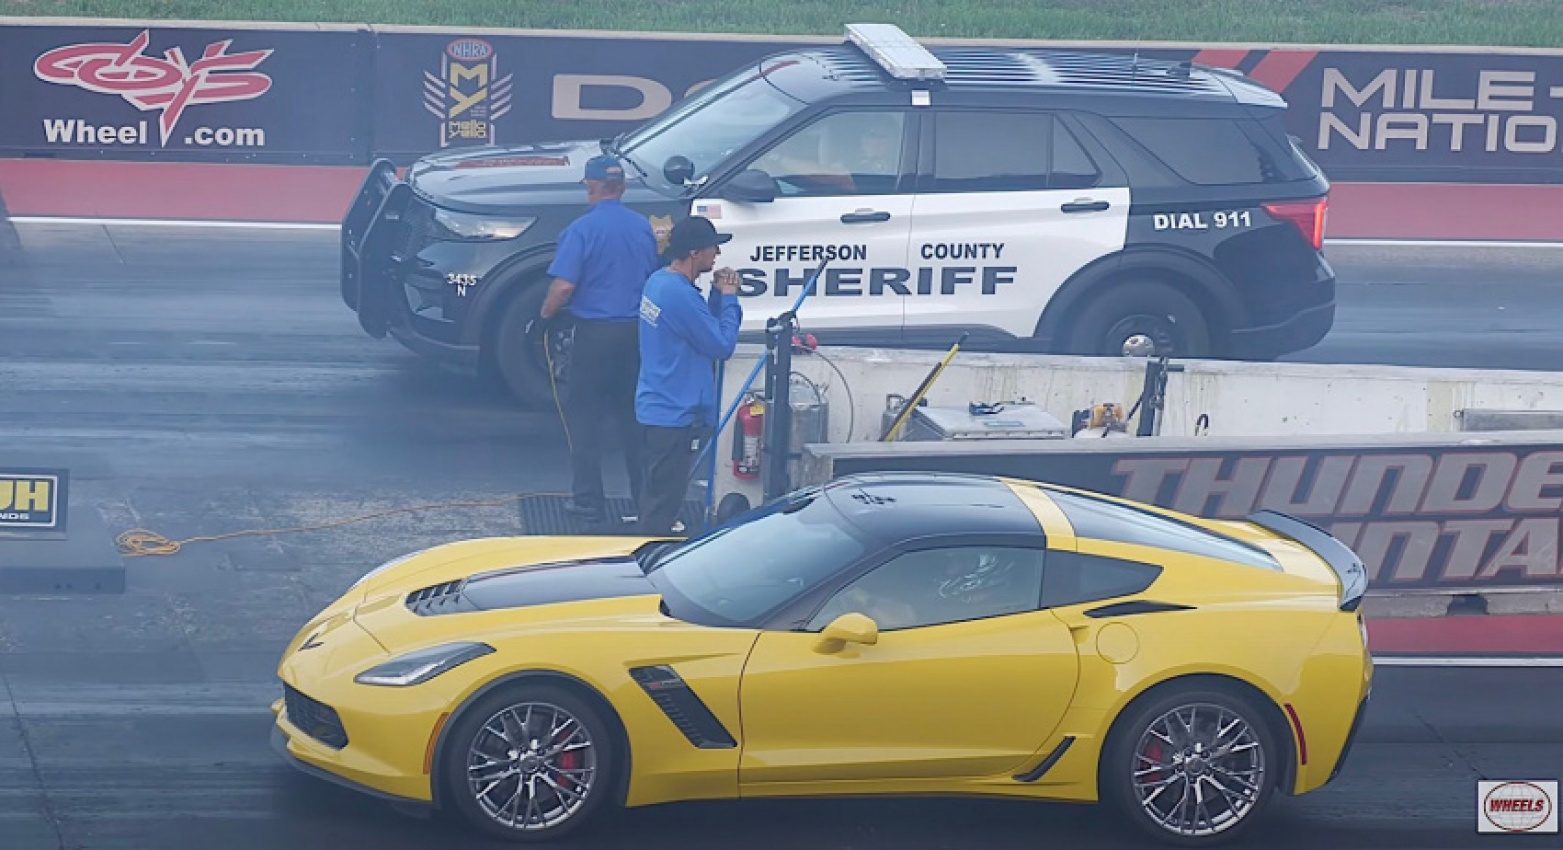 autos, cars, american, asian, celebrity, classic, client, europe, exotic, features, handpicked, luxury, modern classic, muscle, news, newsletter, off-road, sports, trucks, vnex, police explorer challenges corvette to a race